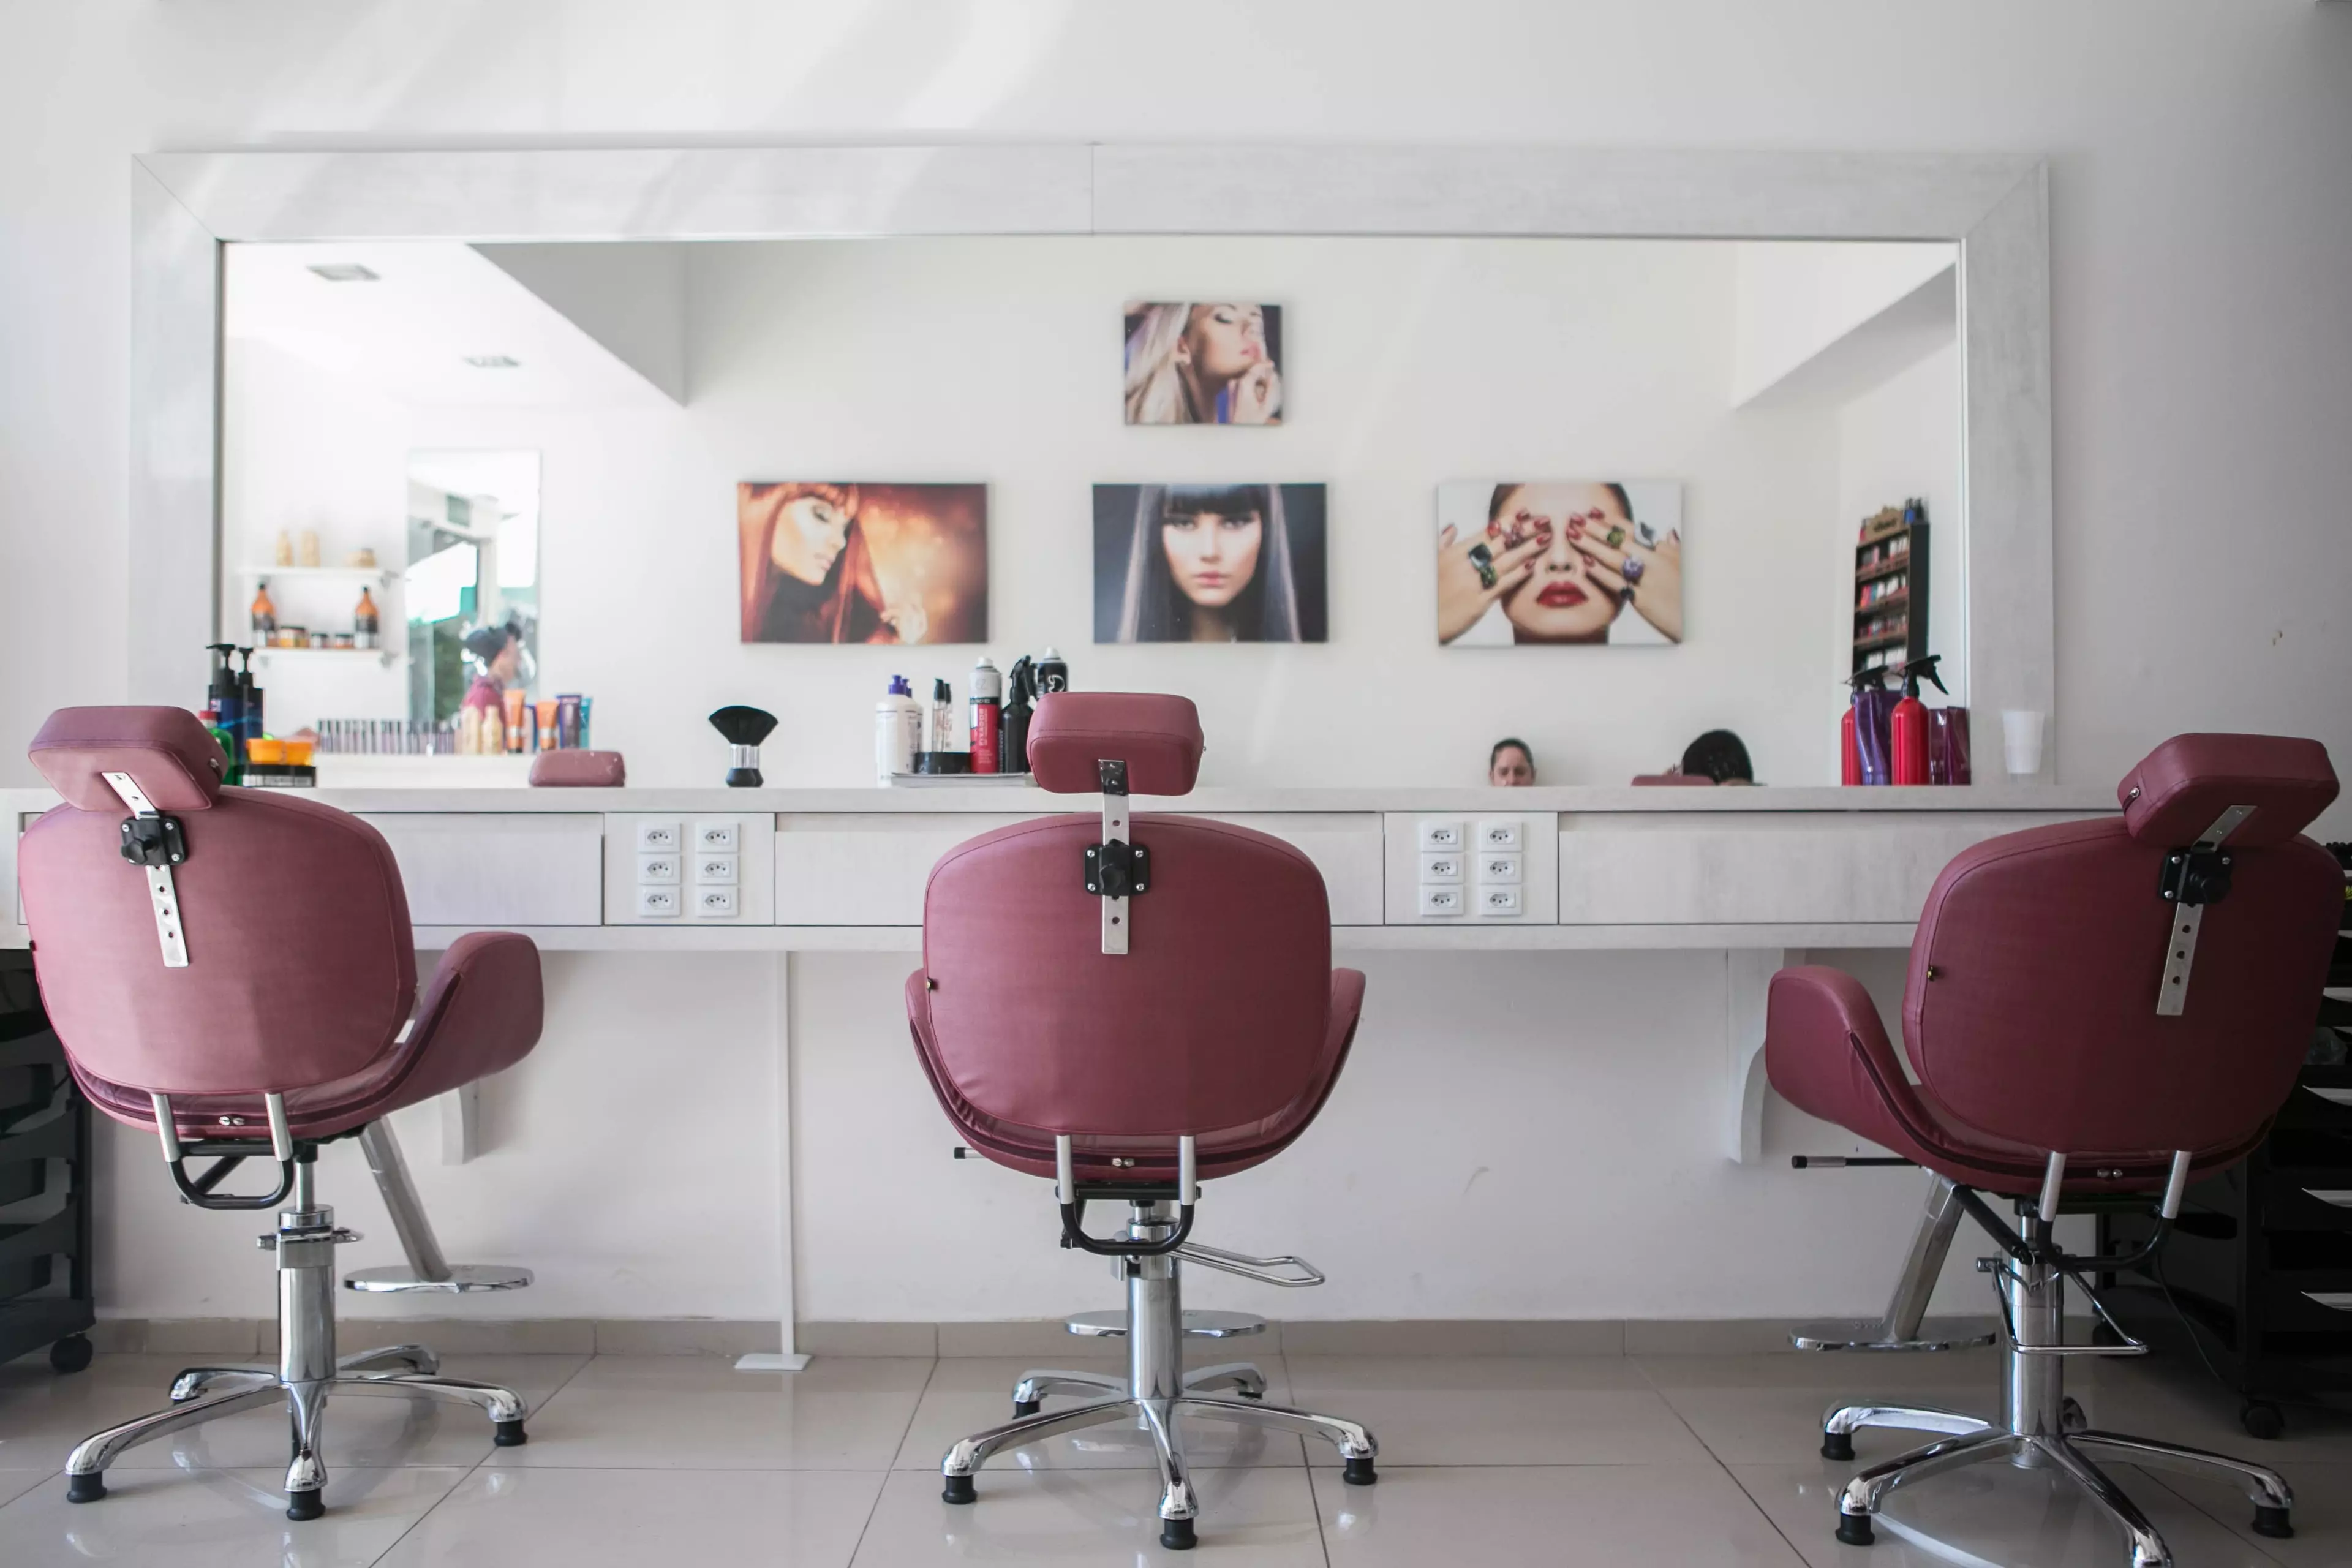 Salons could become safe havens for women (